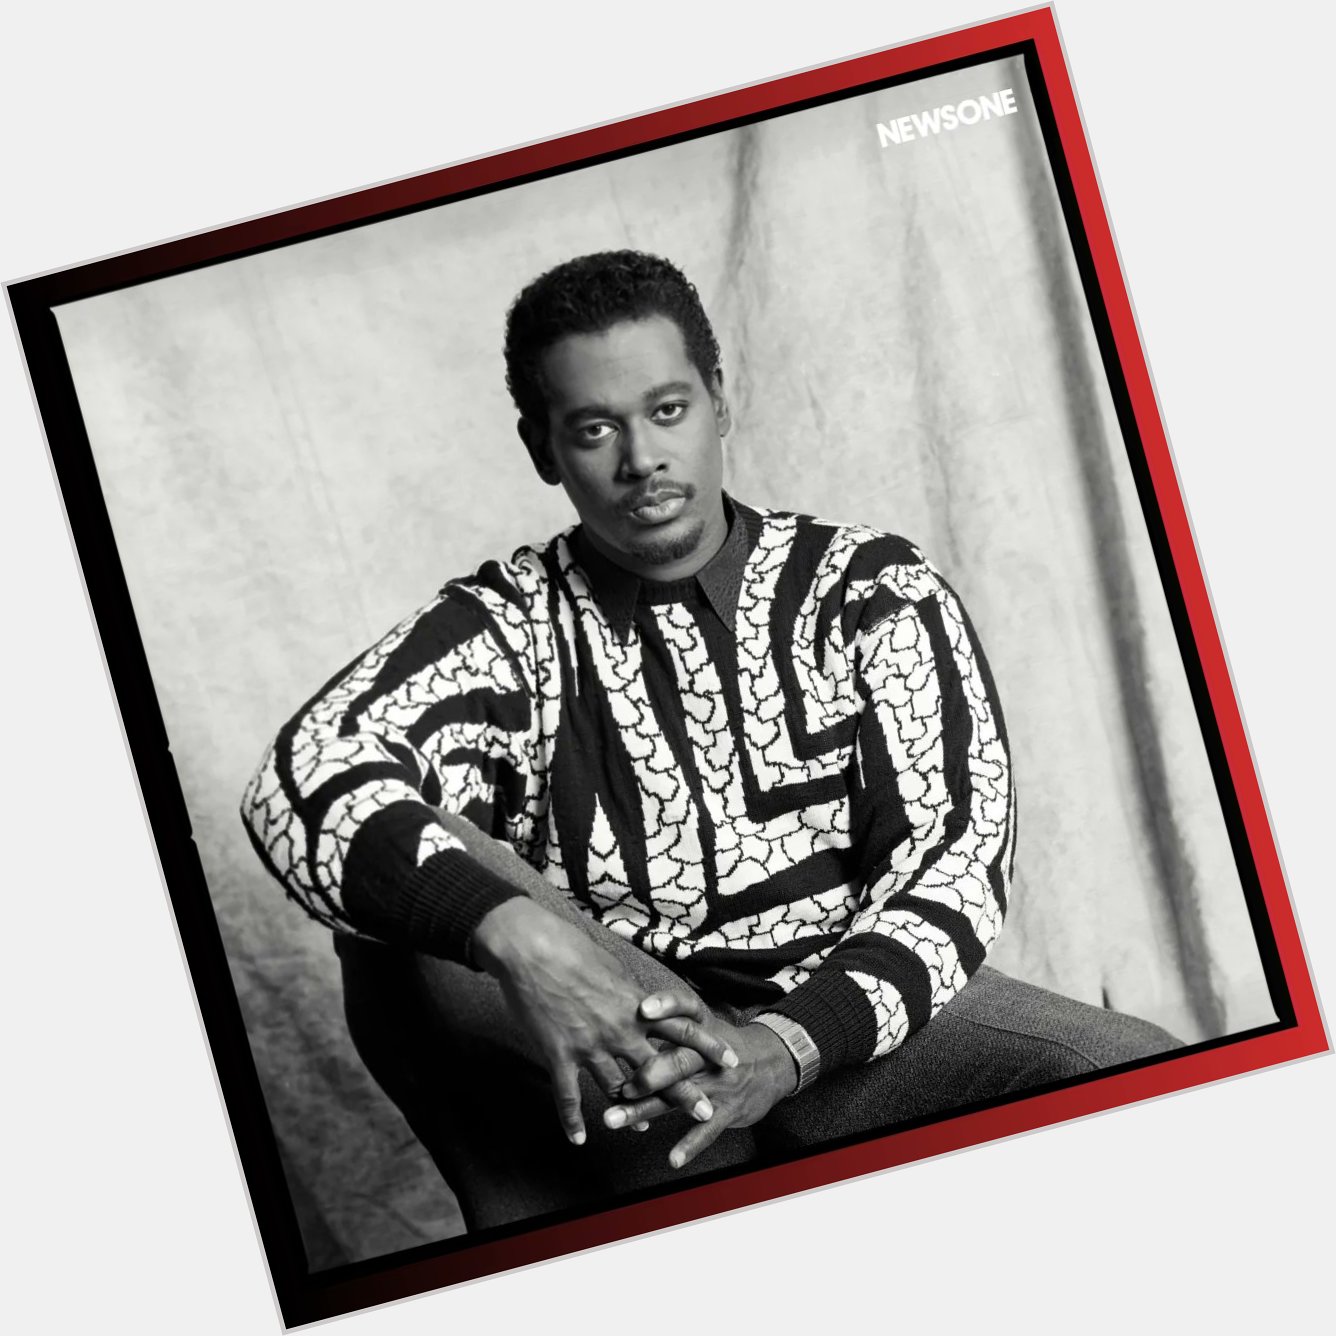 Wishing the legendary Luther Vandross a happy heavenly birthday! Today he would\ve turned 71. : Getty Images 